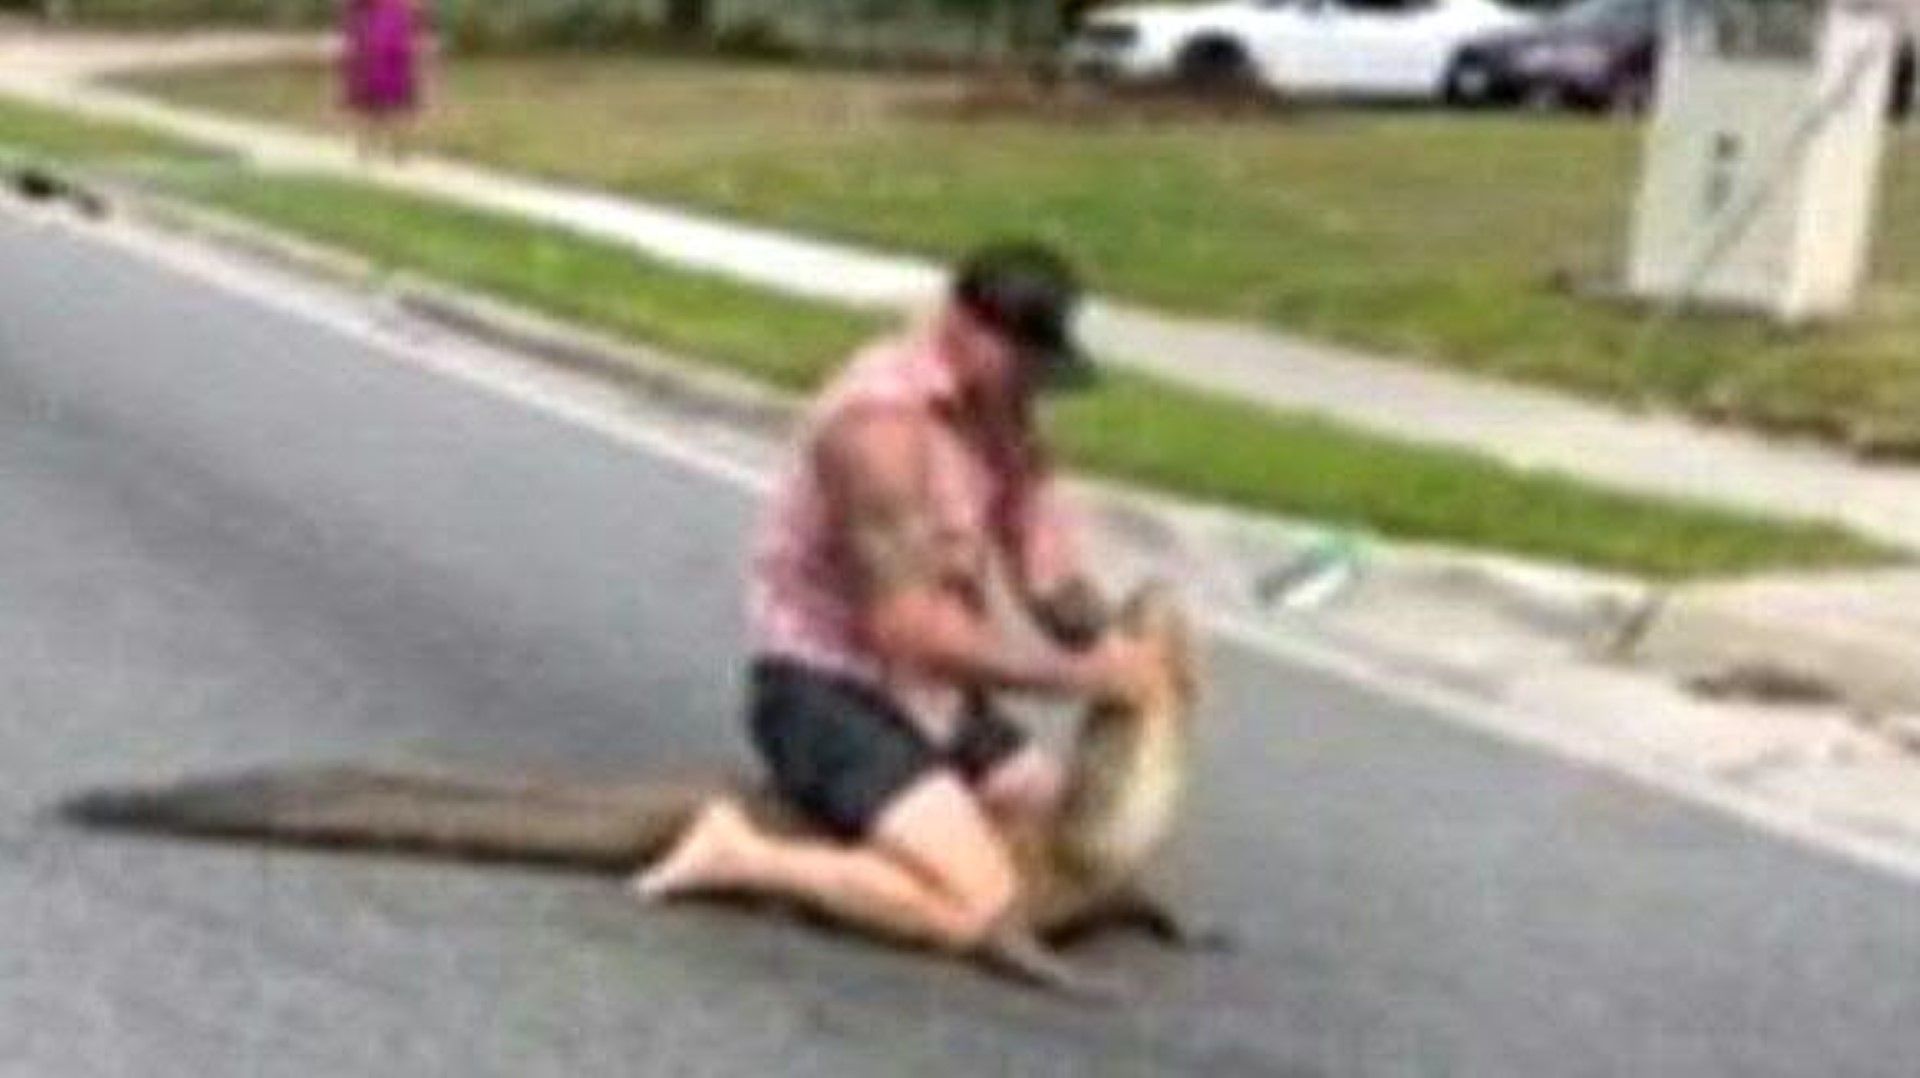 Florida: Man tames alligator with his bare hands